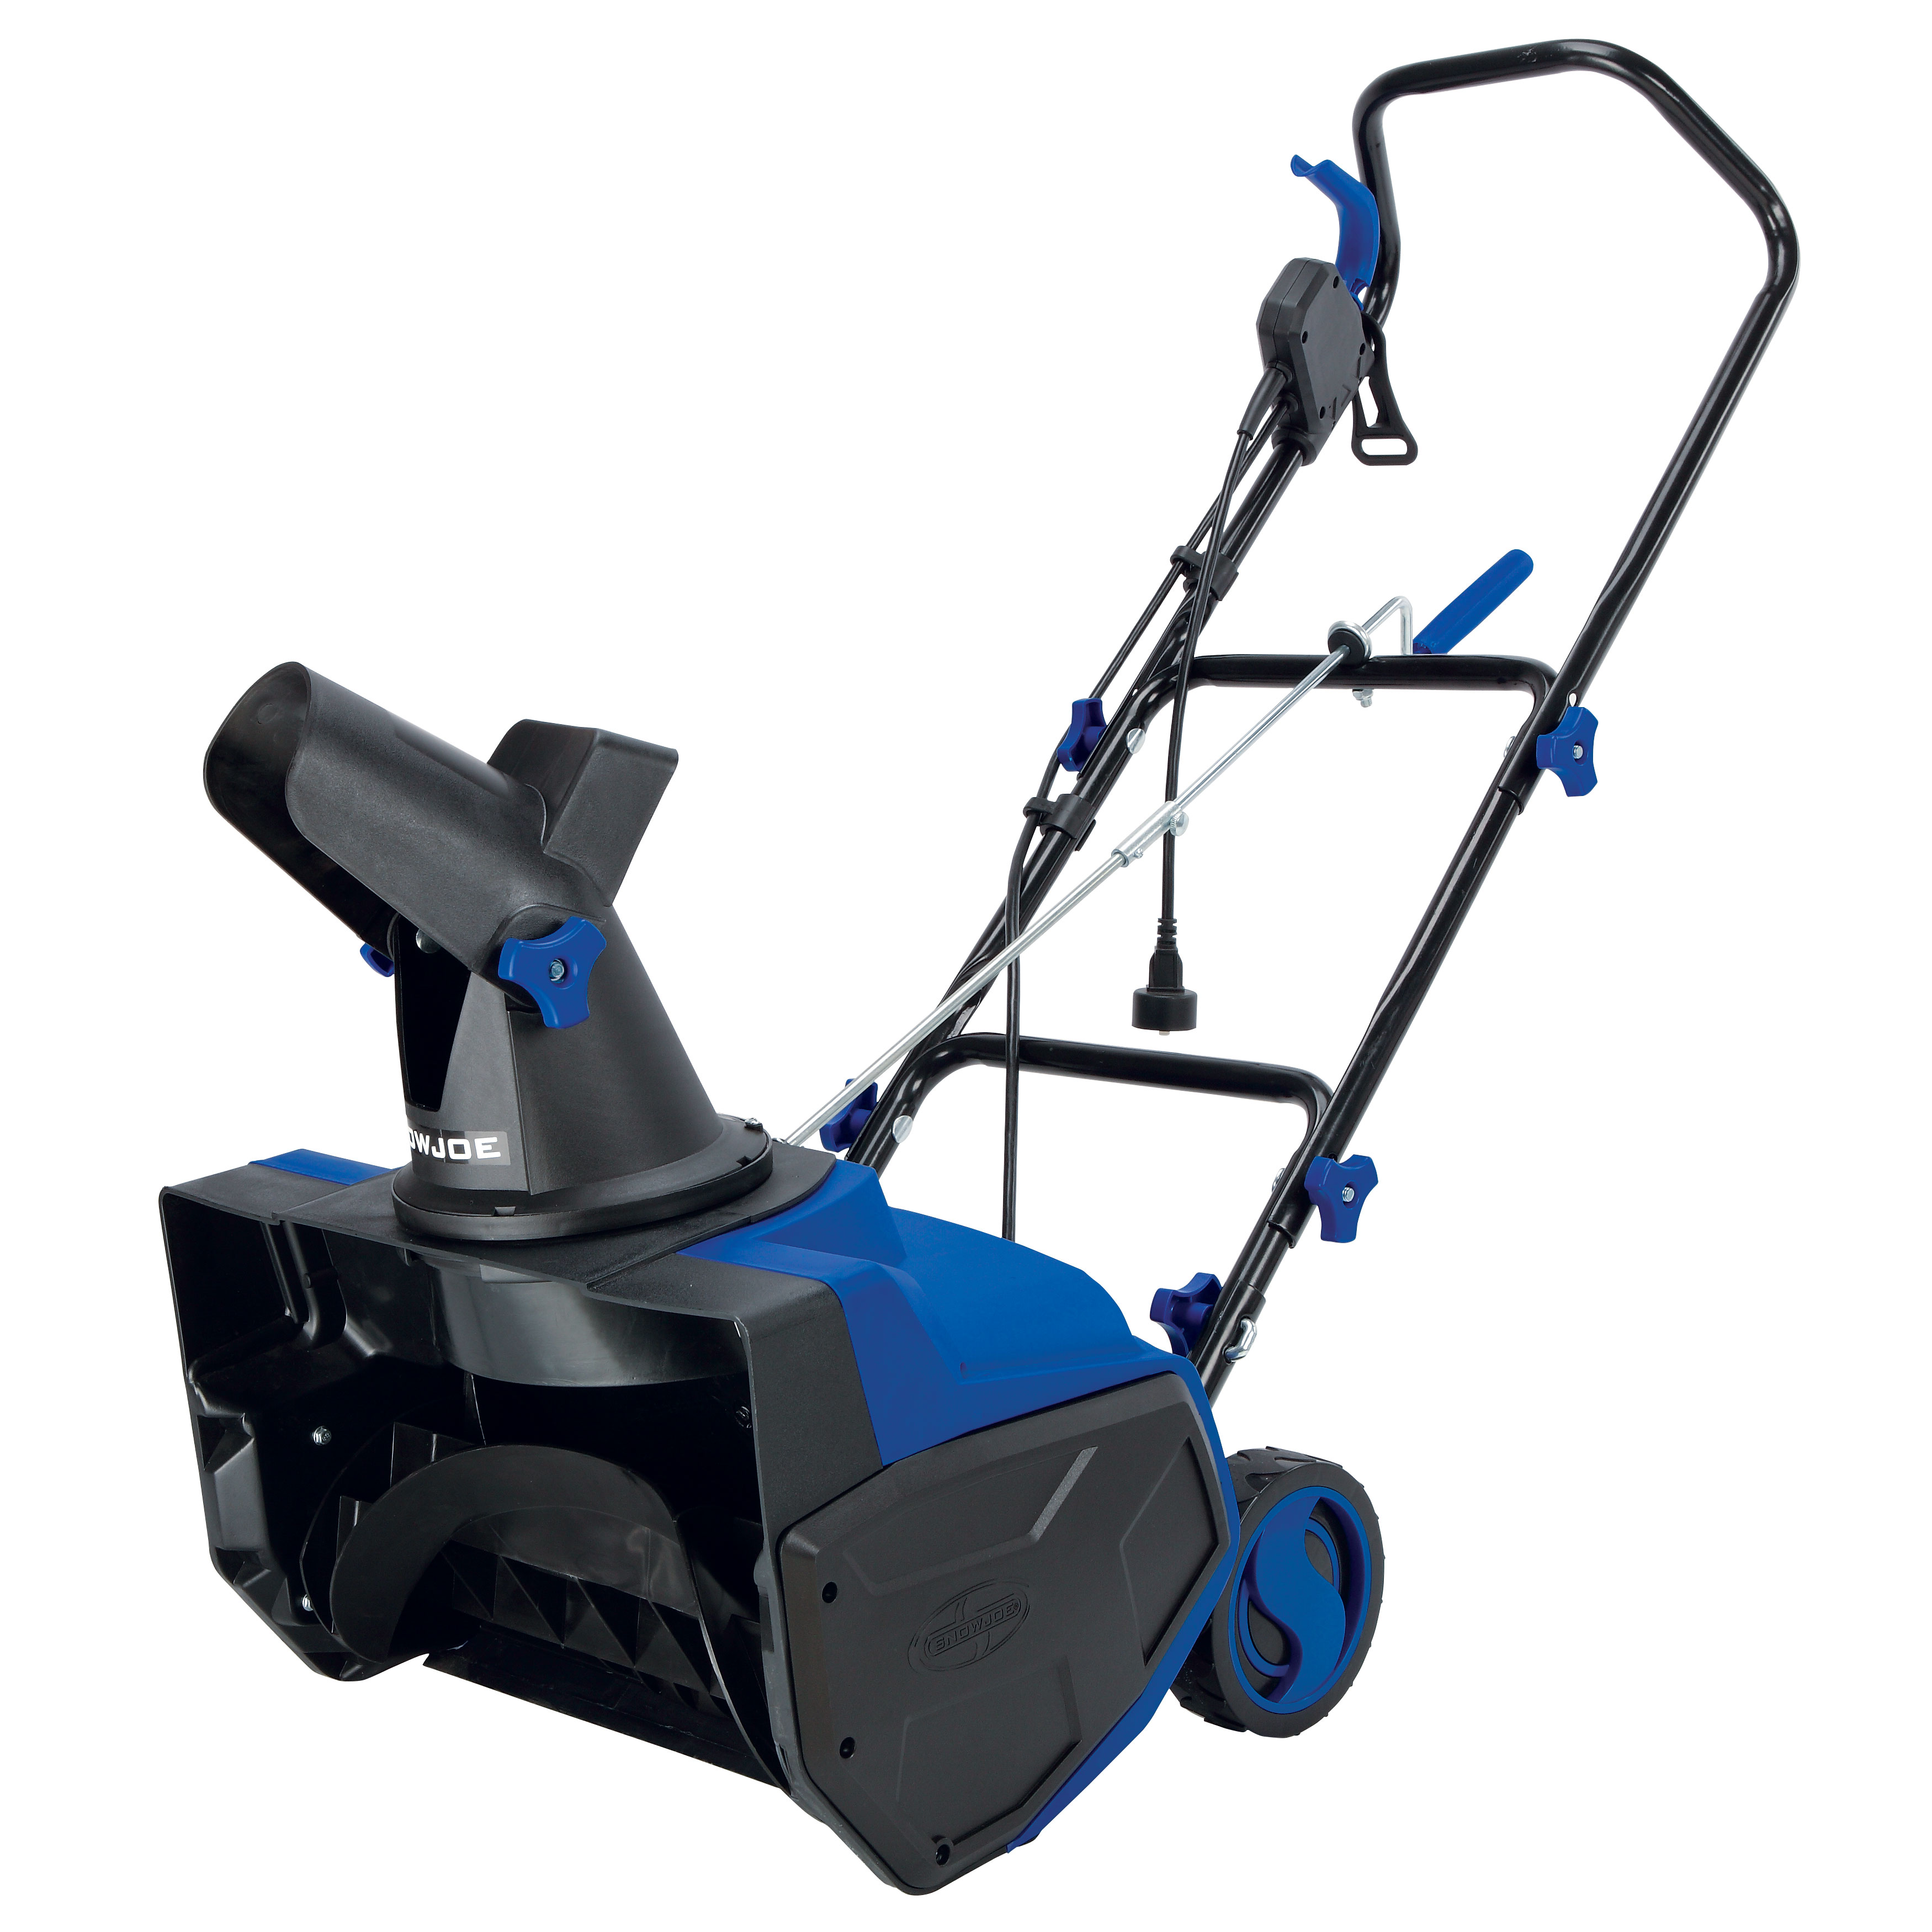 Snow Joe 18-inch Electric Single-Stage Snow Blower, 13-Amp - image 3 of 17